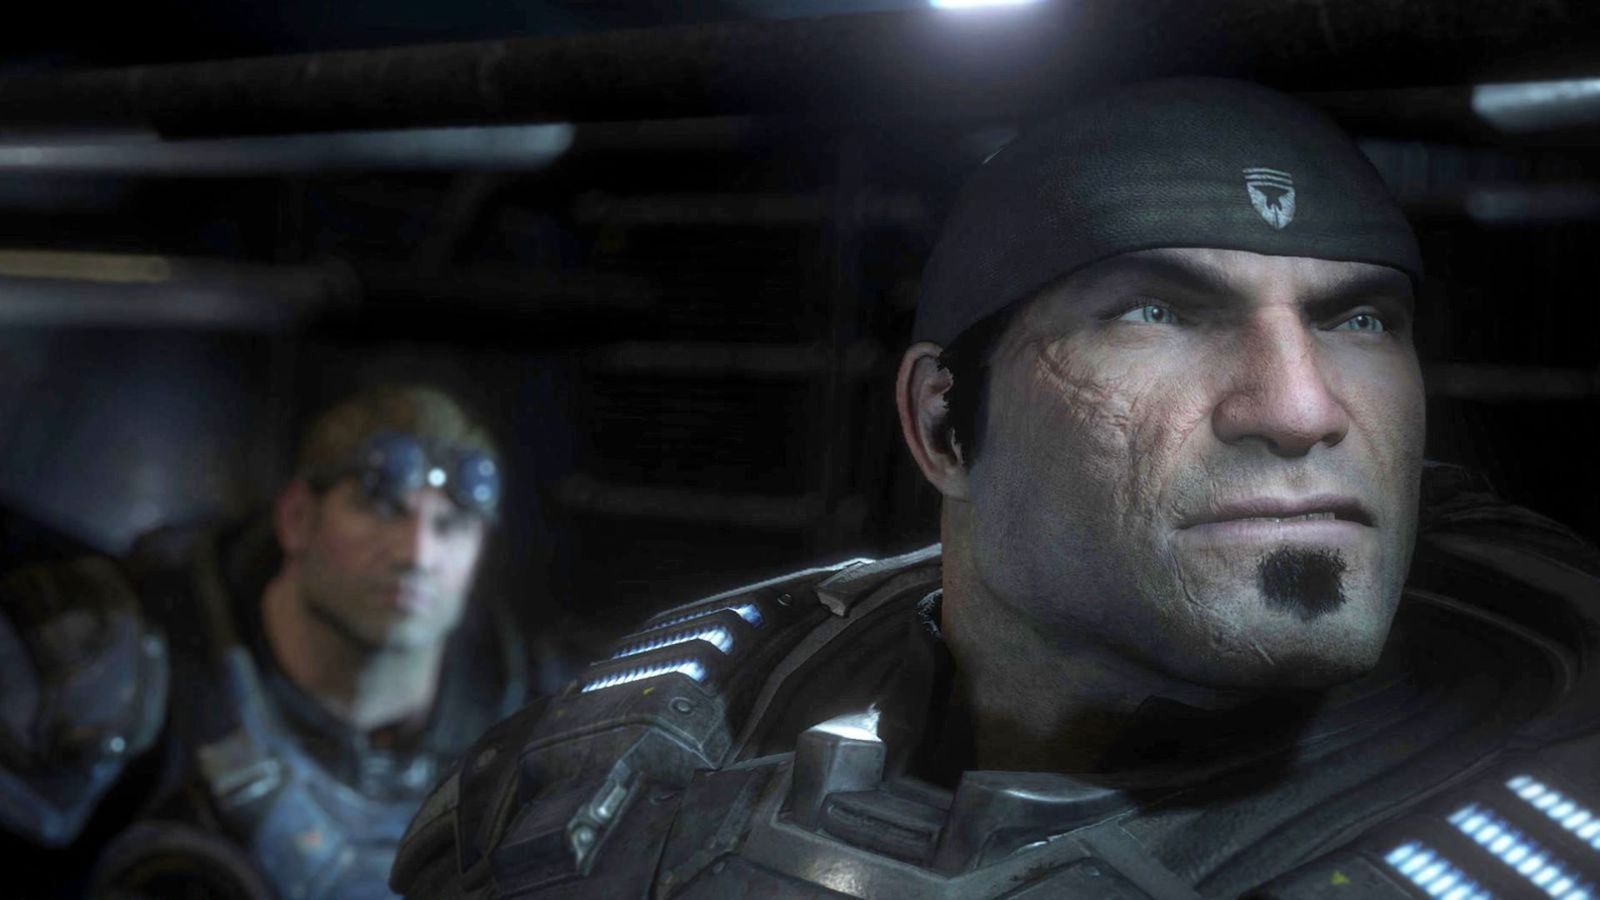 The protagonists in Gears of War: Ultimate Edition